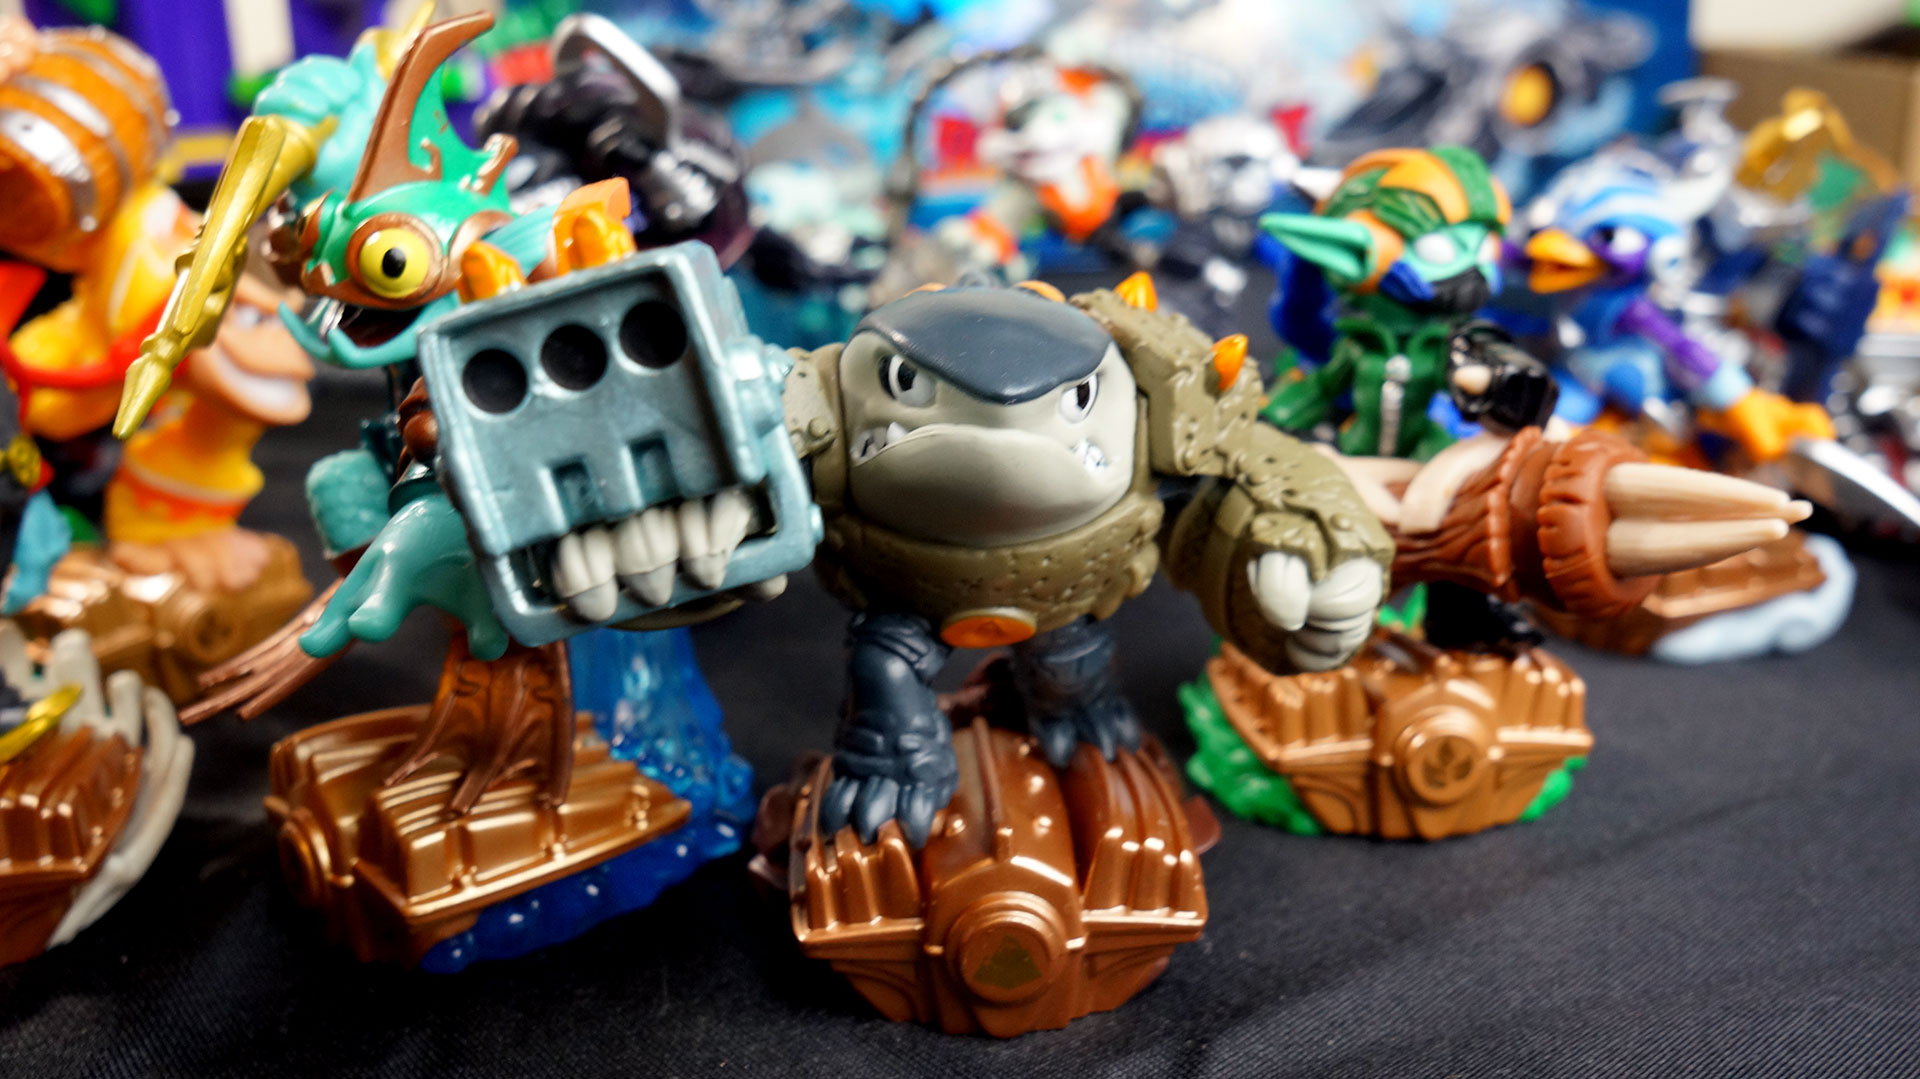 The Skylanders Superchargers Toys Are Mostly Great